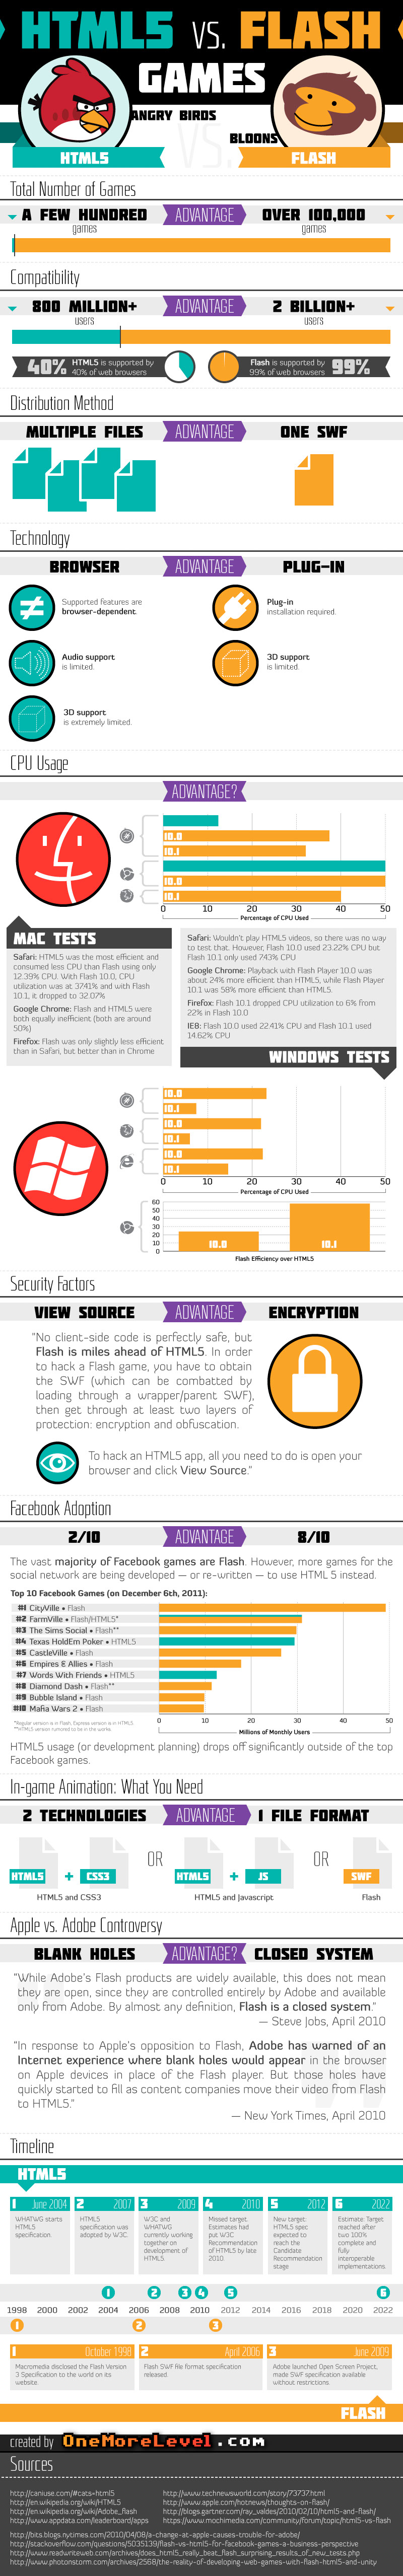 HTML5 Games vs Flash Games-Infographic